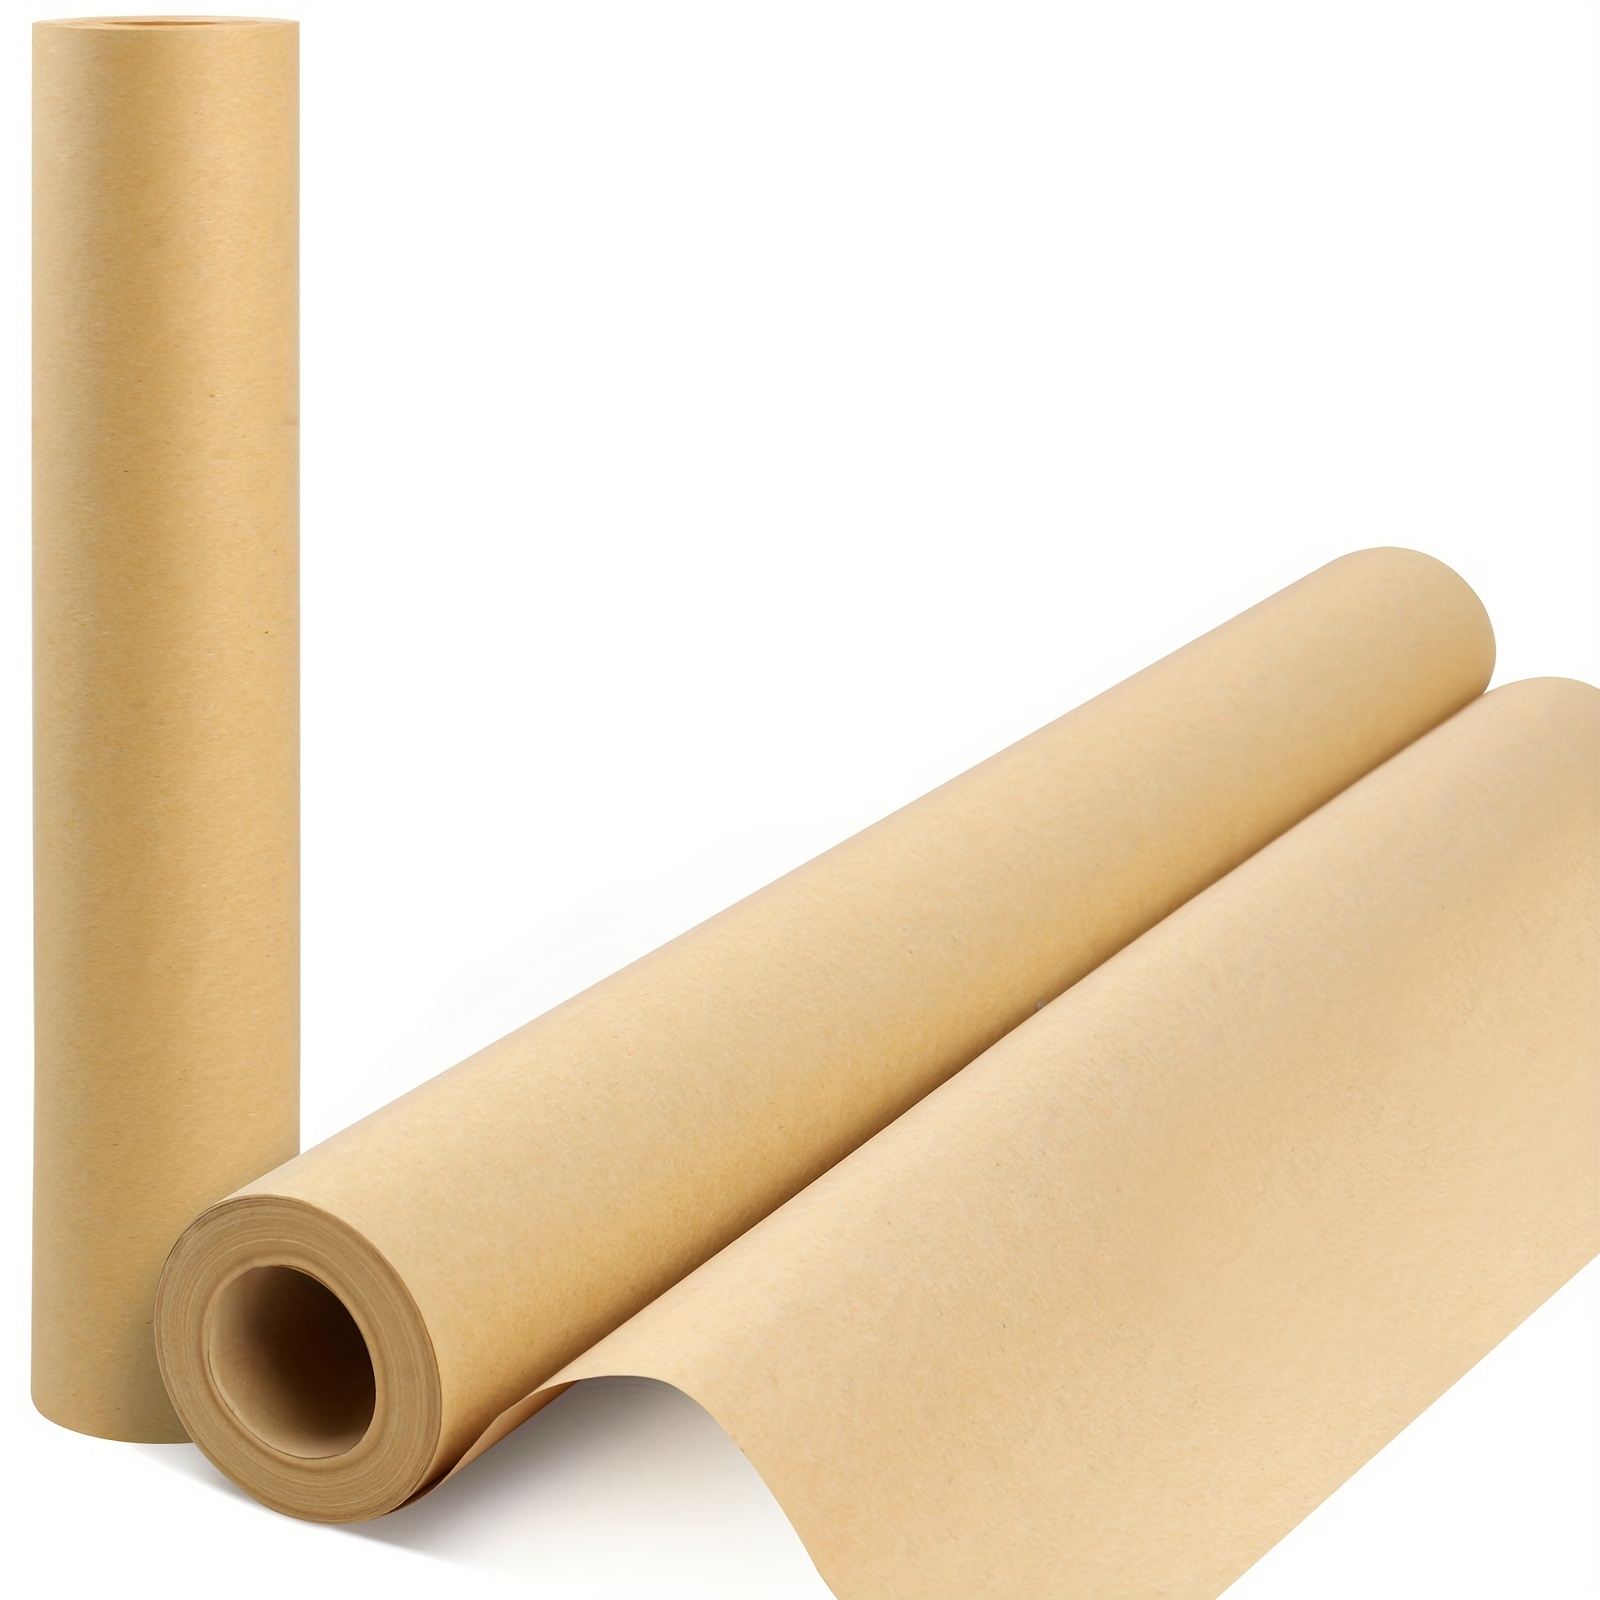 20 Sheets Brown Kraft Paper, Craft Paper Roll, Flowers Wrapping Paper Roll,  Brown Packing Paper Roll For Shipping, Table Runner Masking Paper Roll For